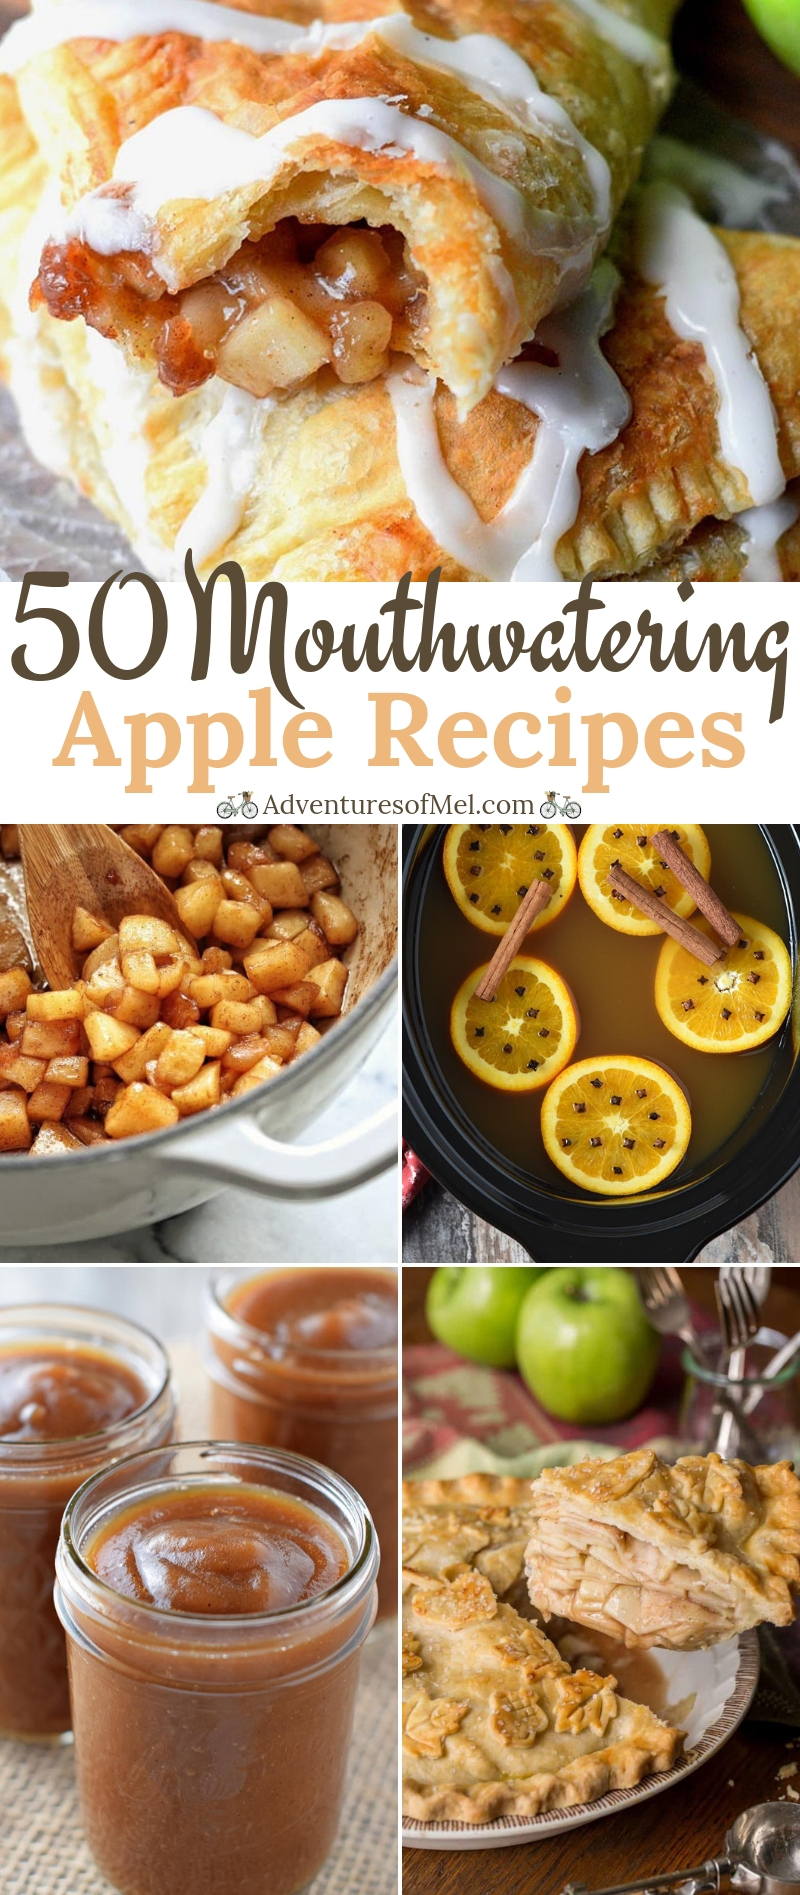 Mouthwatering apple recipes for what to do with apples